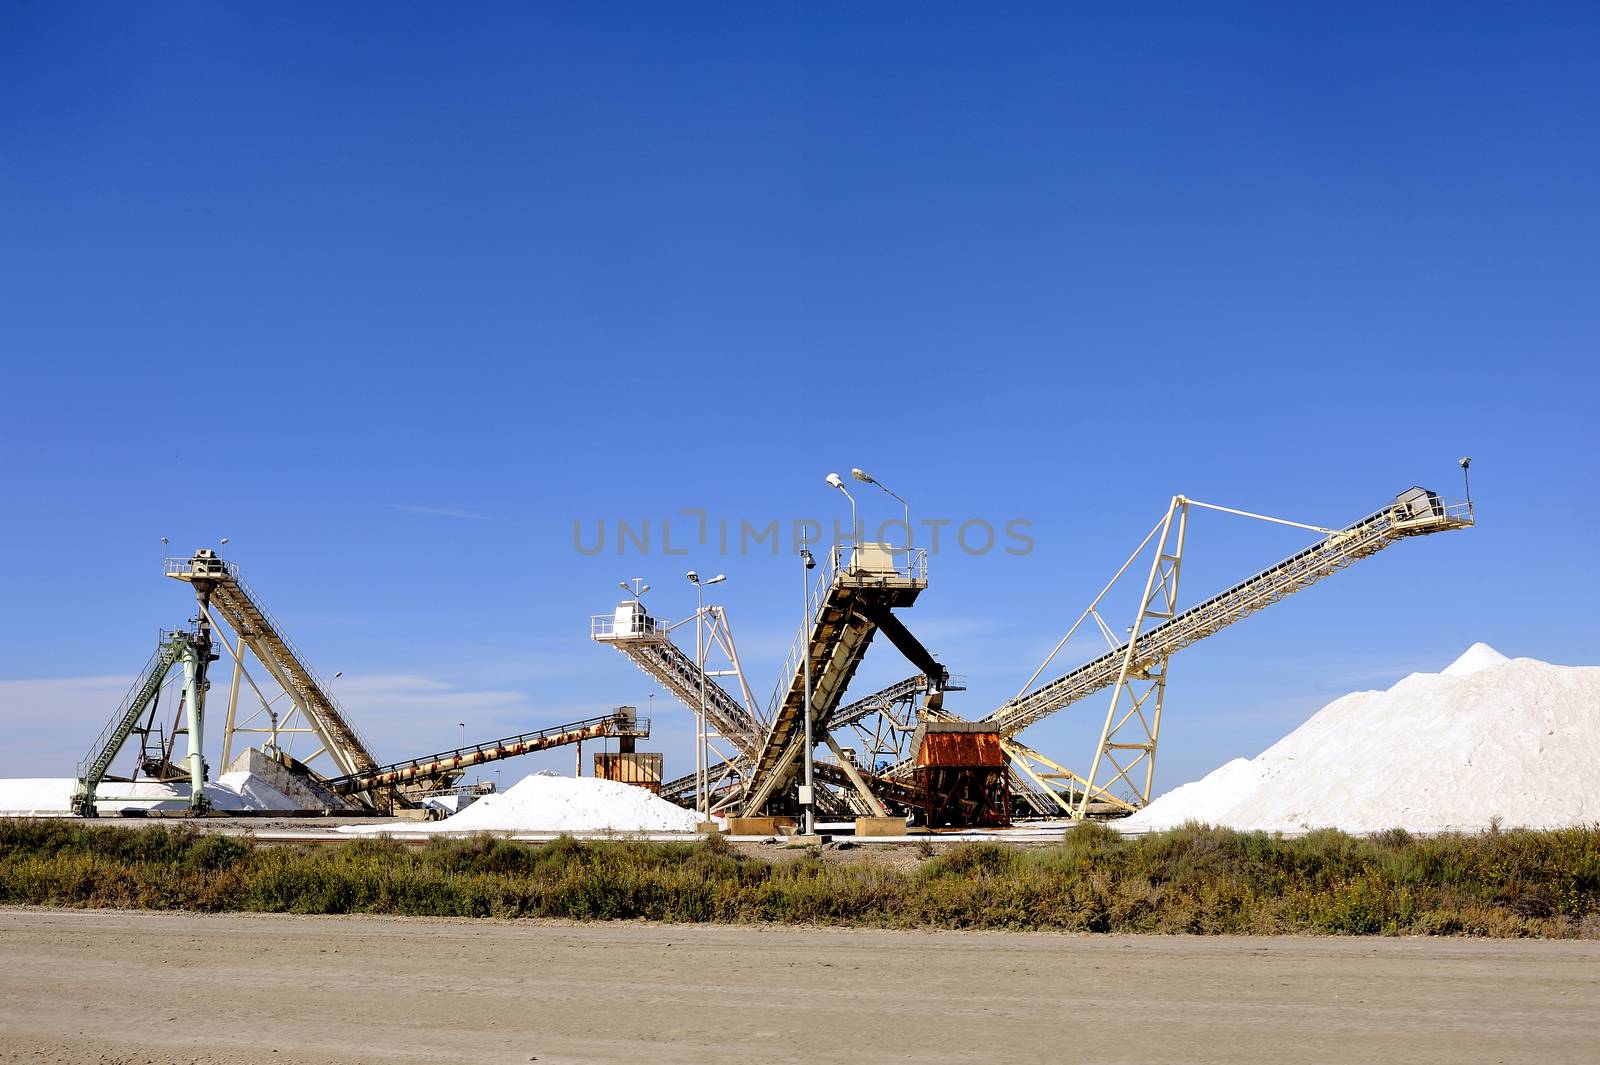 Site operating company saline Aigues-Mortes by gillespaire